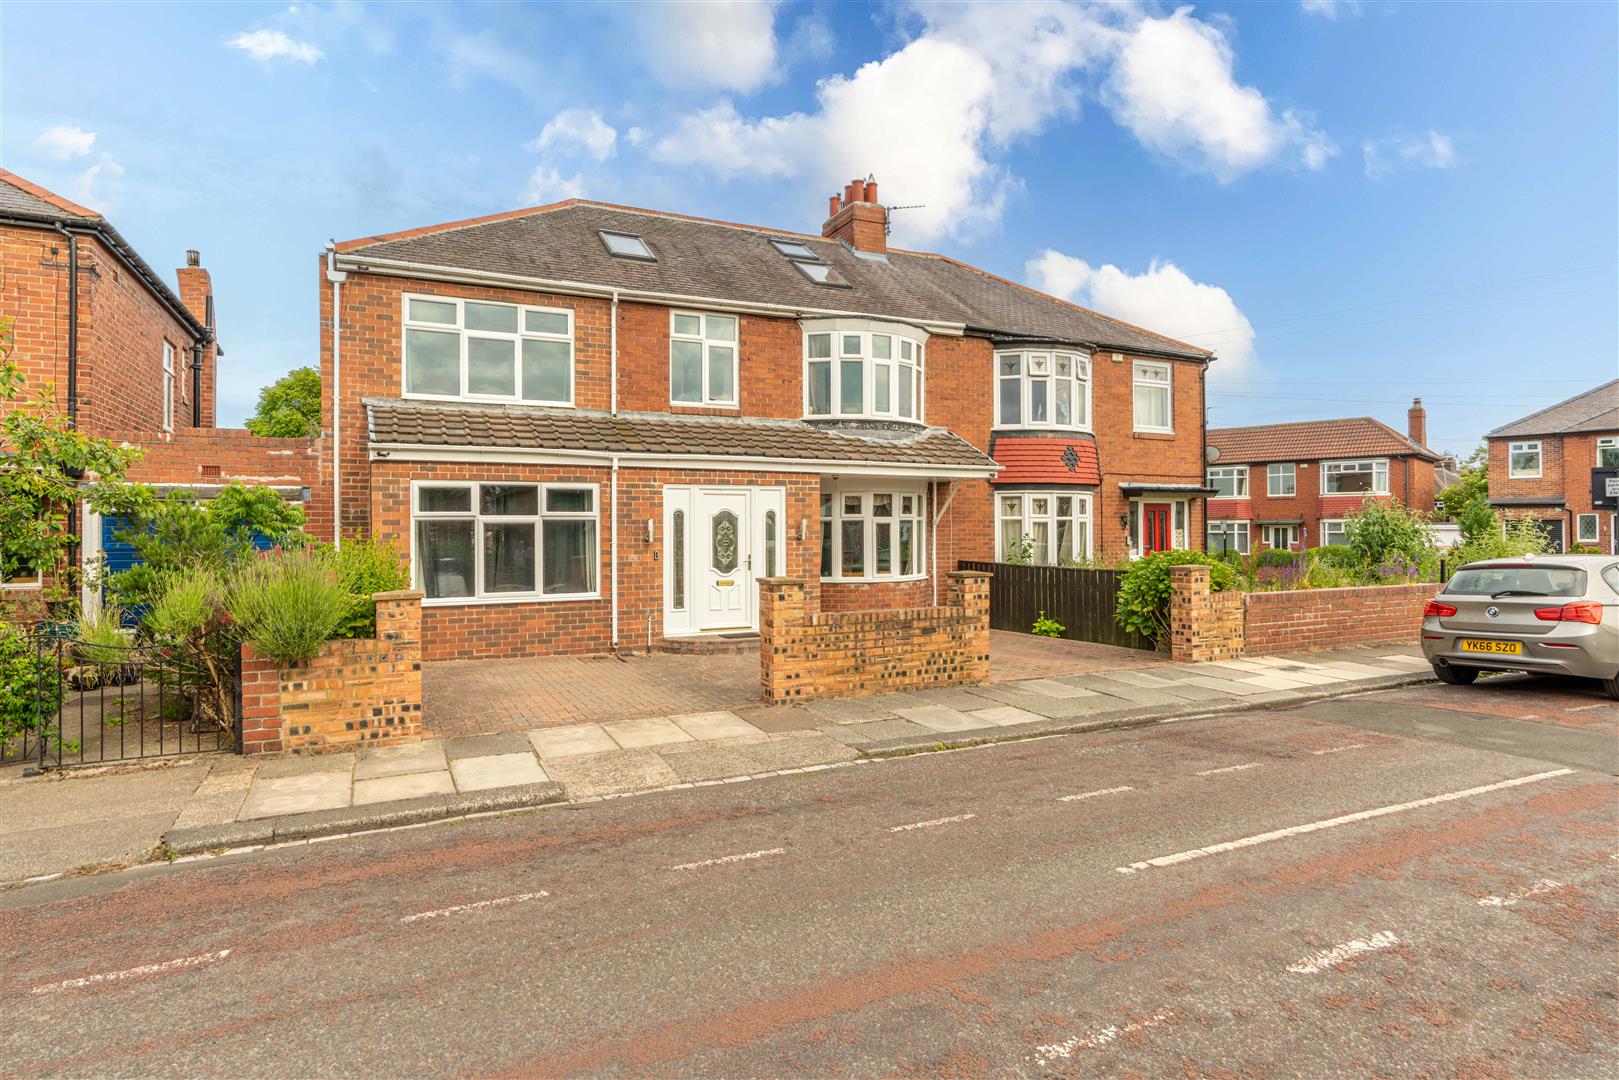 7 bed semi-detached house for sale in Stokesley Grove, High Heaton - Property Image 1